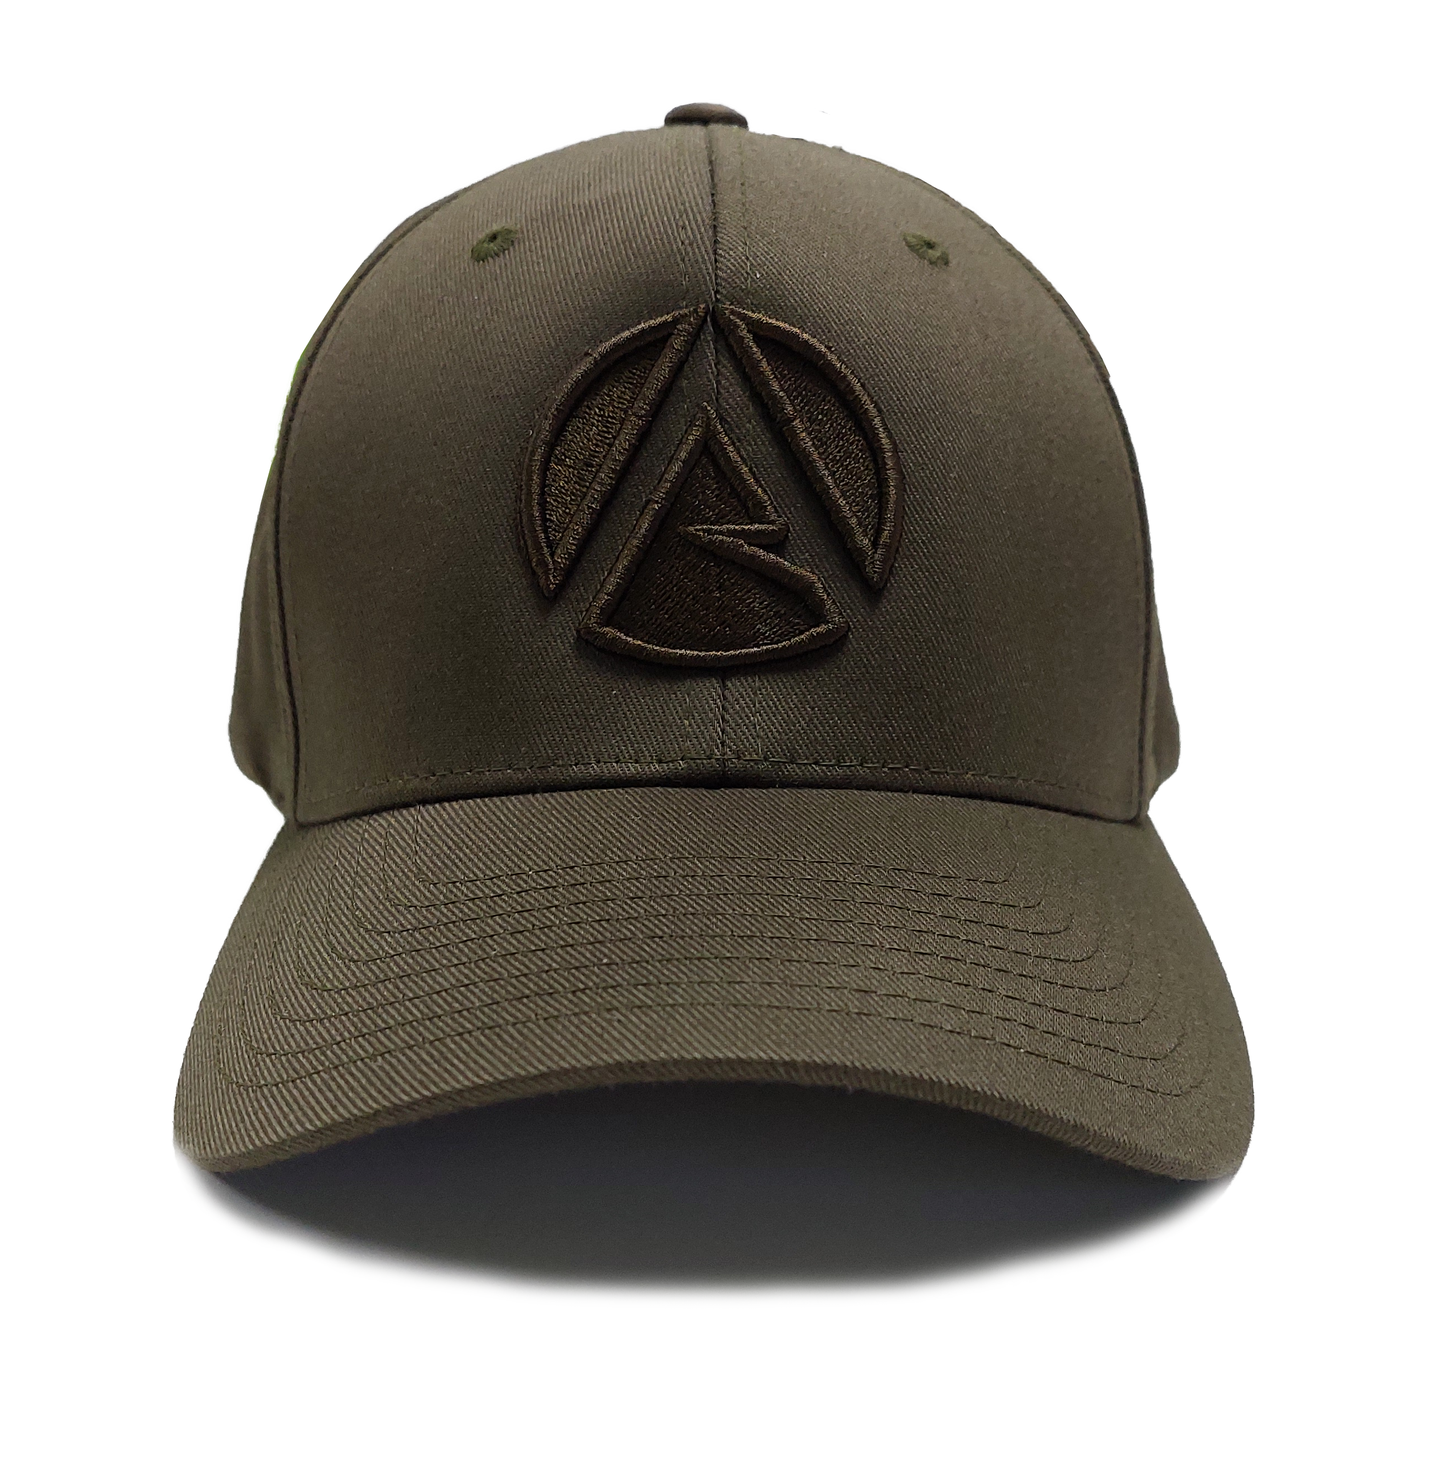 AT052 - Baseball Cap Curved Peak Front Icon - Olive